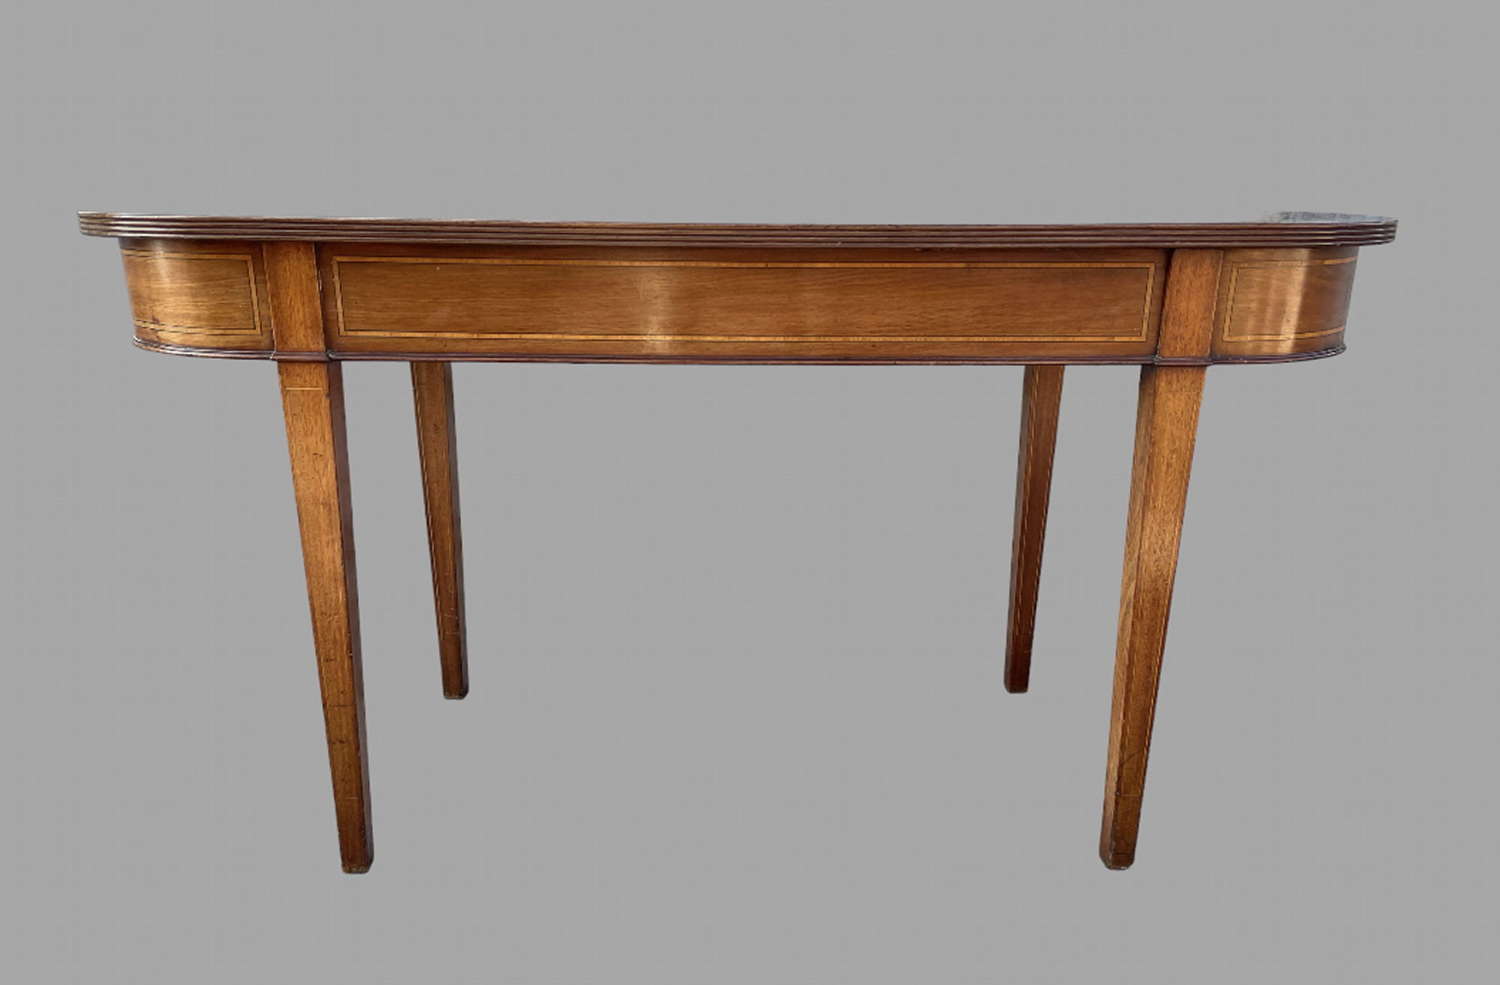 A 19thc Mahogany Inlaid Console Table